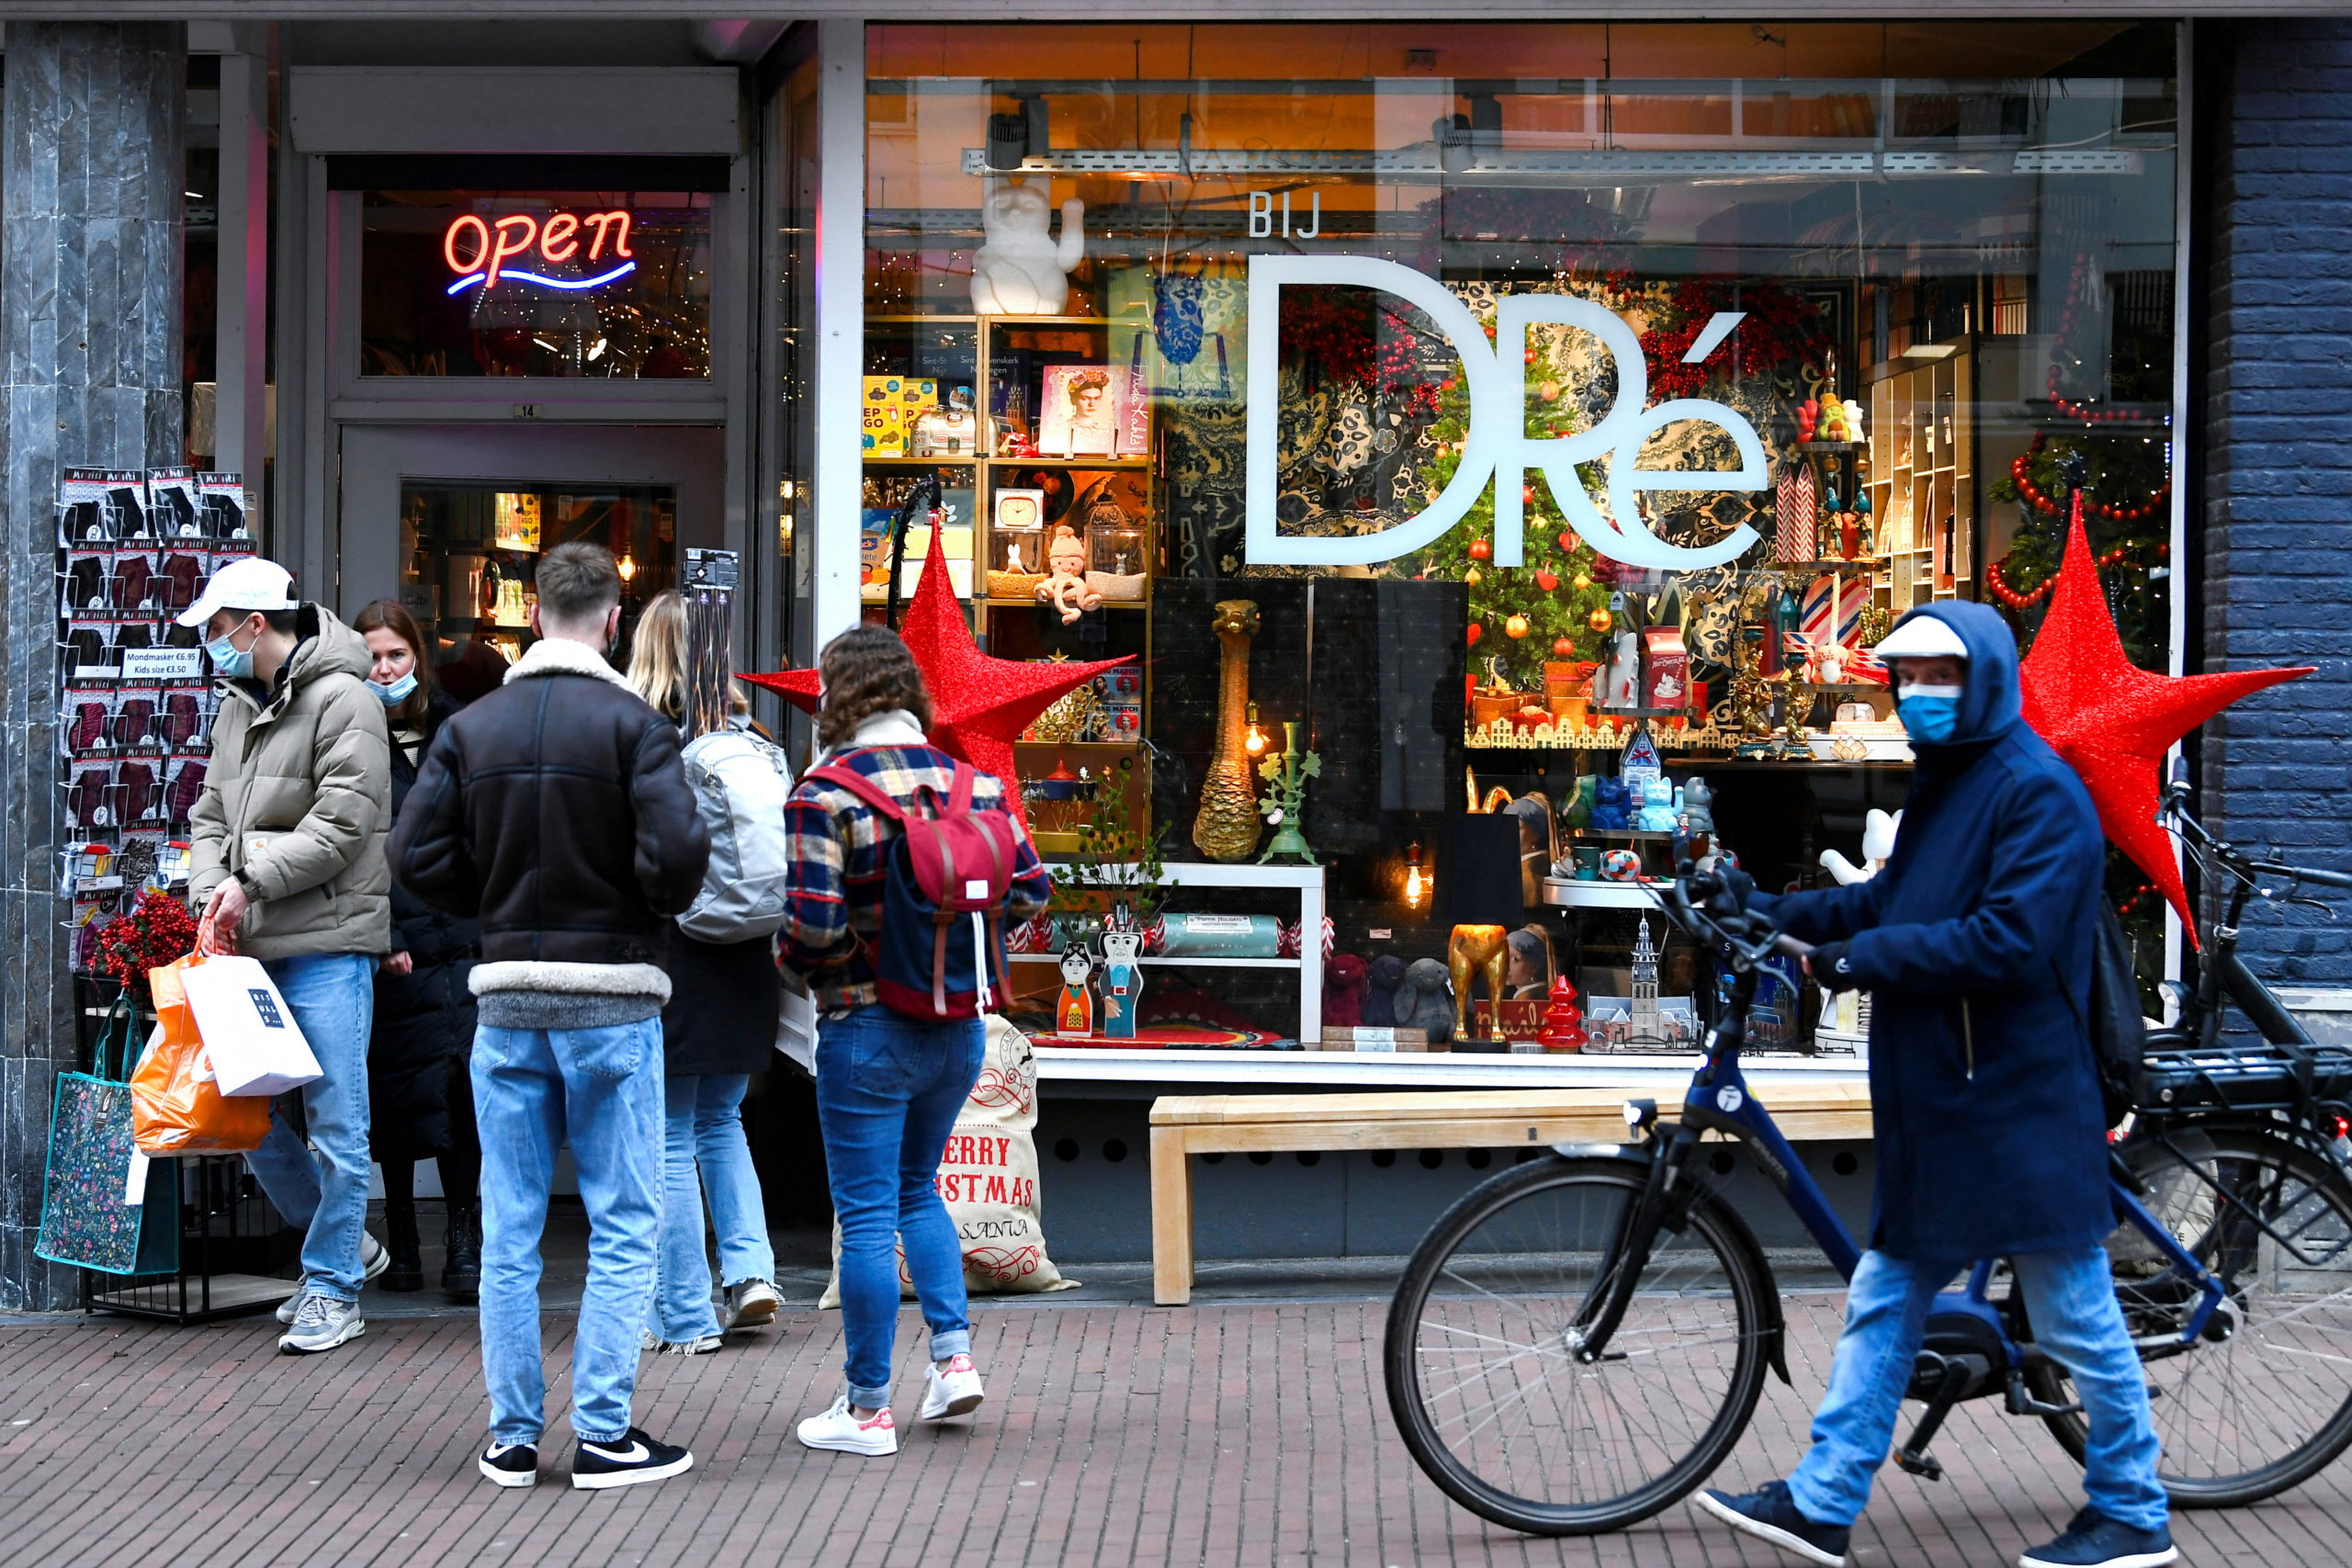 FILE PHOTO: People do their Christmas shopping before the Dutch government's expected announcement of a "strict" Christmas lockdown to curb the spread of the Omicron coronavirus variant, in the city centre of Nijmegen, Netherlands December 18, 2021. REUTERS/Piroschka van de Wouw